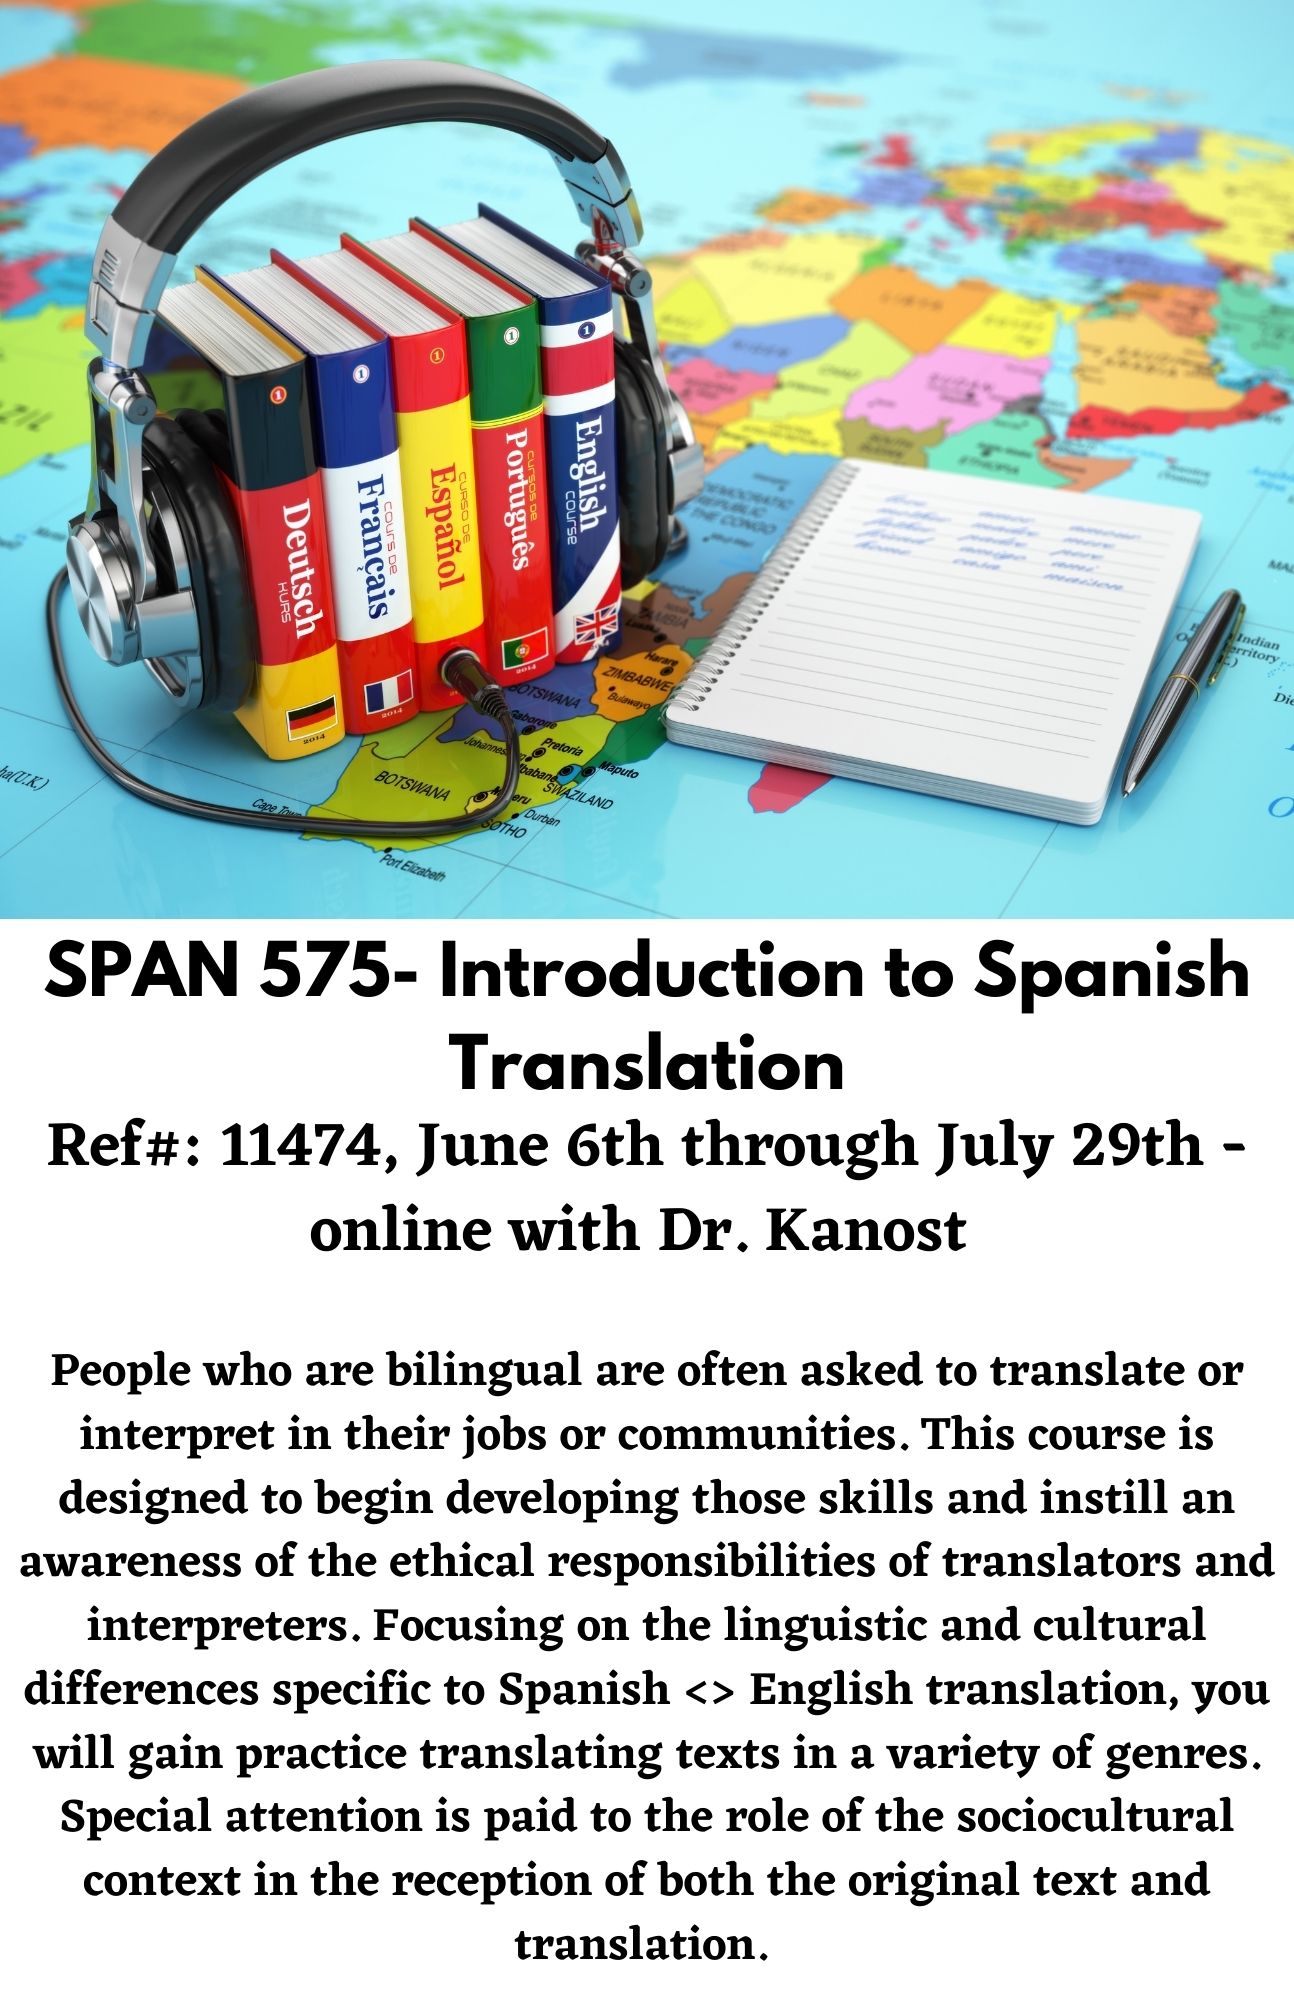 SPAN 575- Introduction to Spanish Translation. Ref#: 11474, June 6th through July 29th - online with Dr. Kanost   People who are bilingual are often asked to translate or interpret in their jobs or communities. This course is designed to begin developing those skills and instill an awareness of the ethical responsibilities of translators and interpreters. Focusing on the linguistic and cultural differences specific to Spanish <> English translation, you will gain practice translating texts in a variety of genres. Special attention is paid to the role of the sociocultural context in the reception of both the original text and translation.